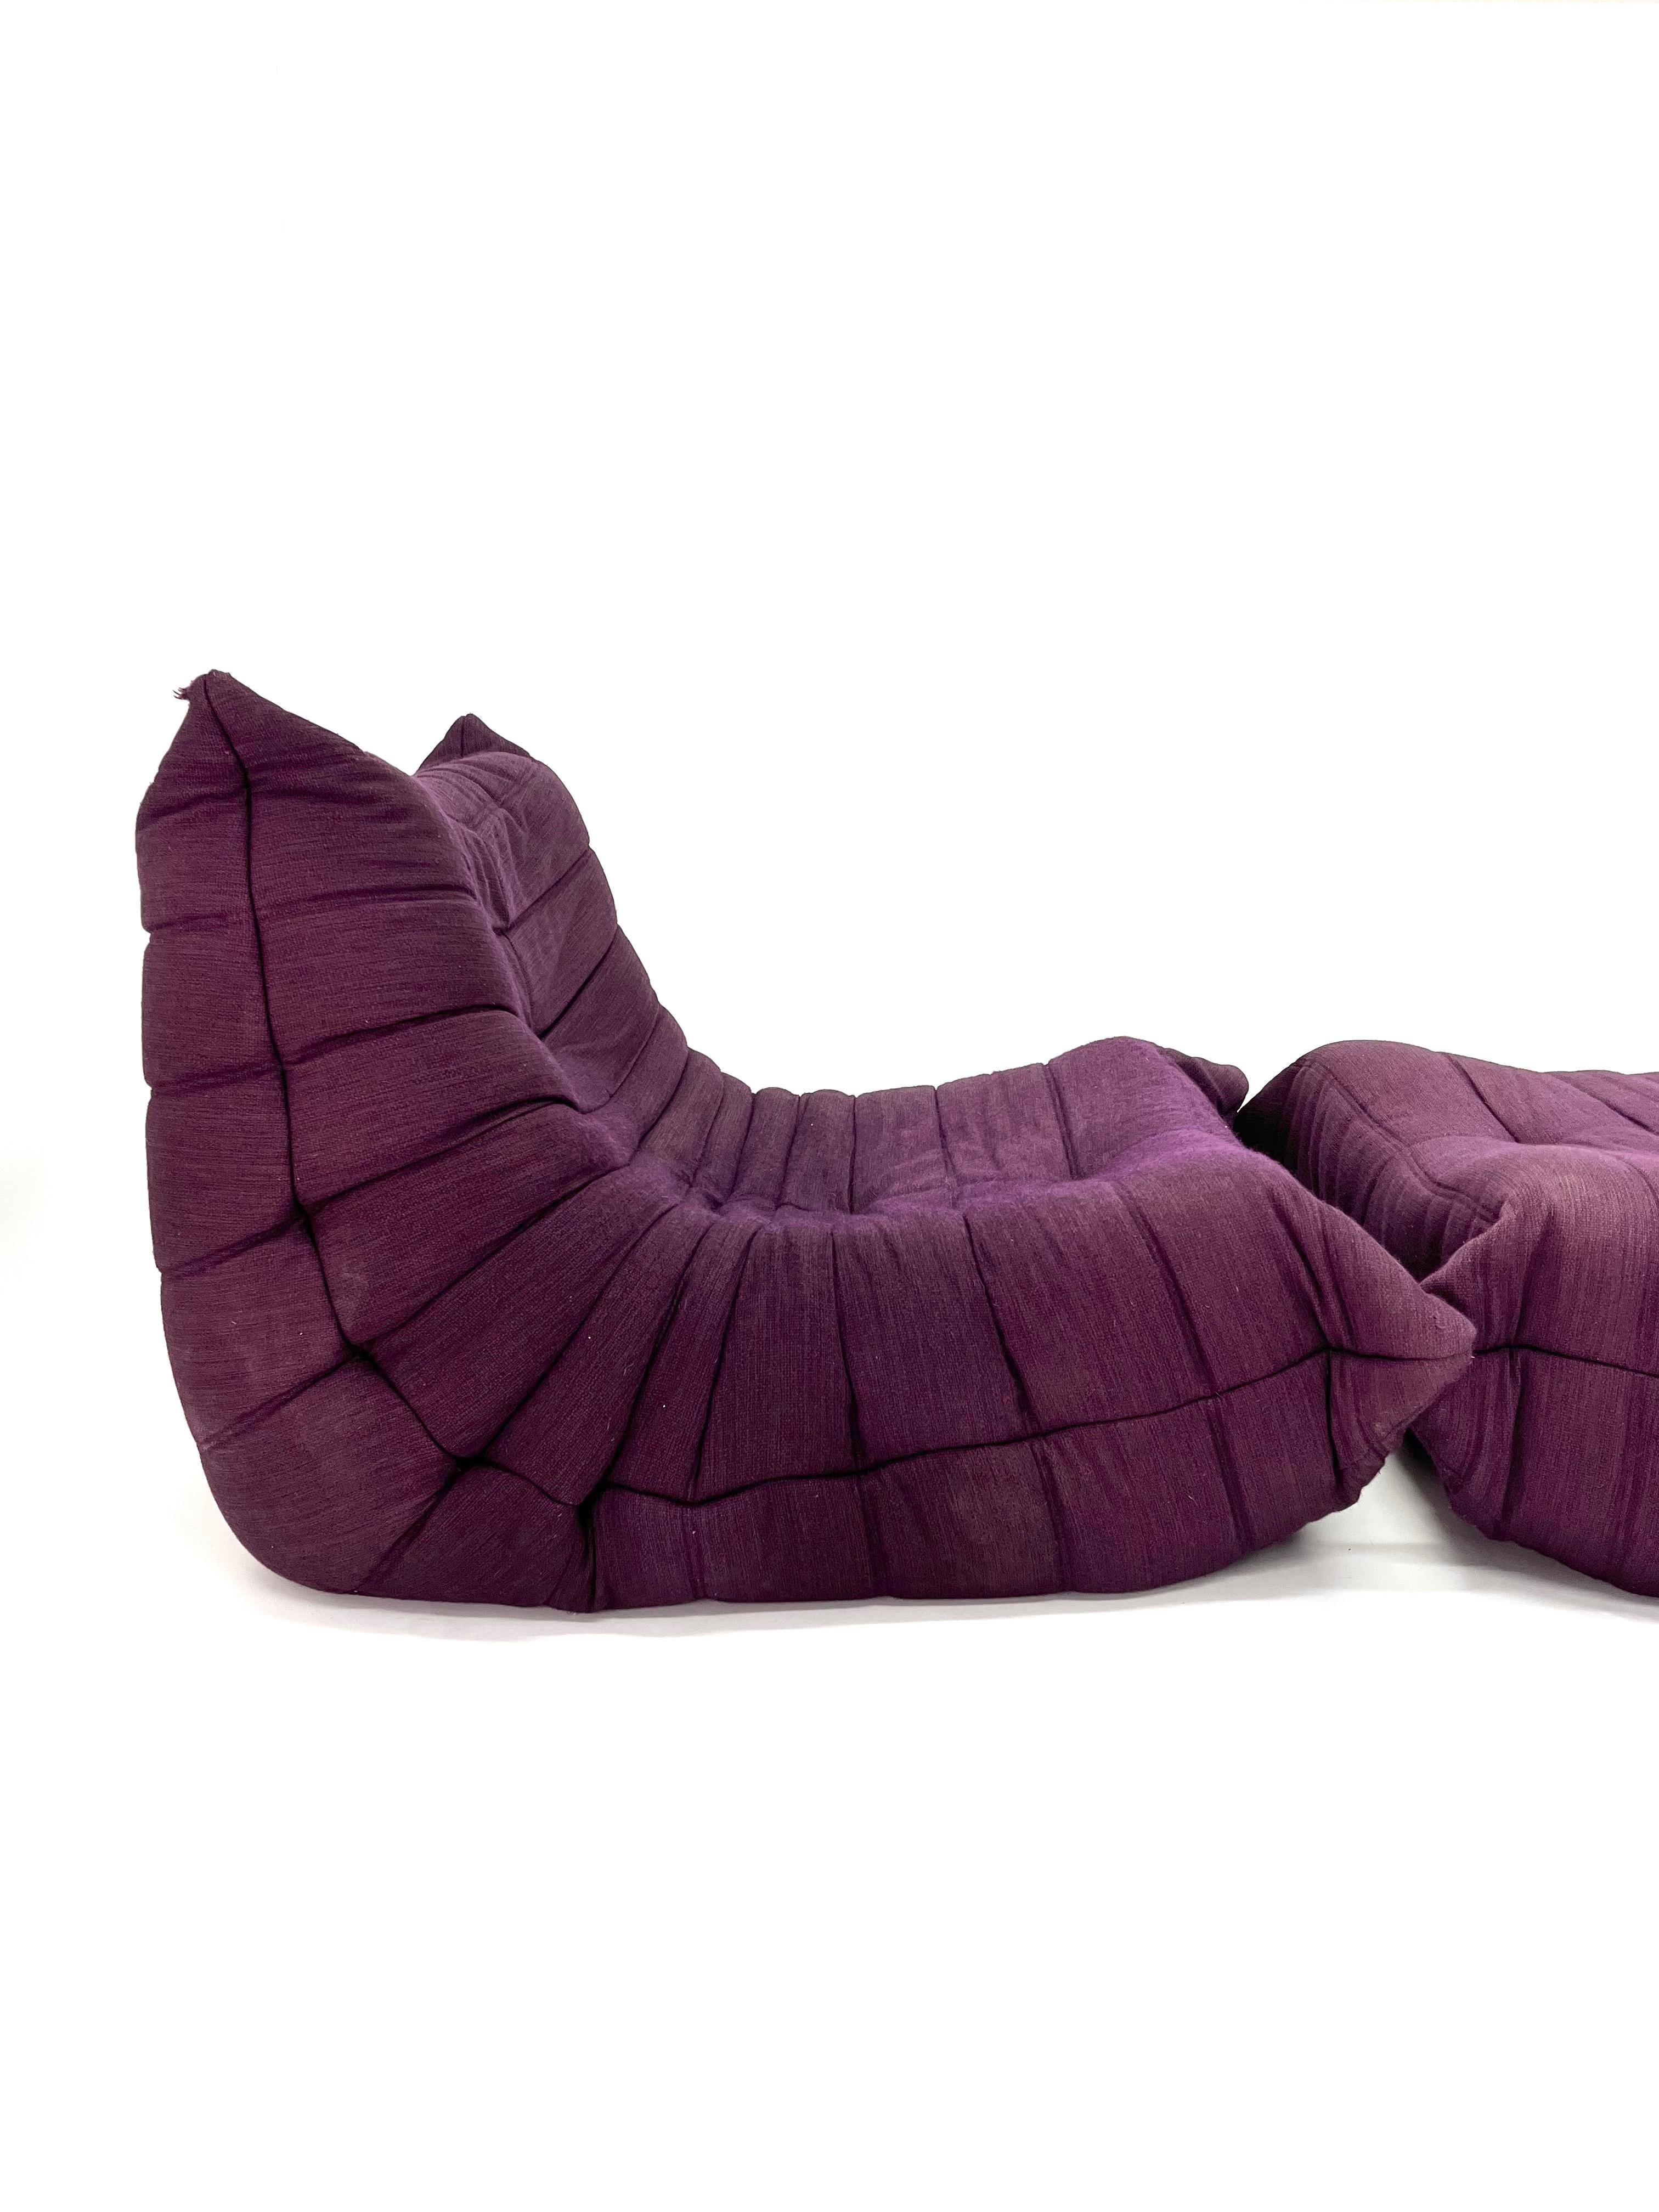 Togo Chair and Ottoman in Purple by Michel Ducaroy for Ligne Roset For Sale 5